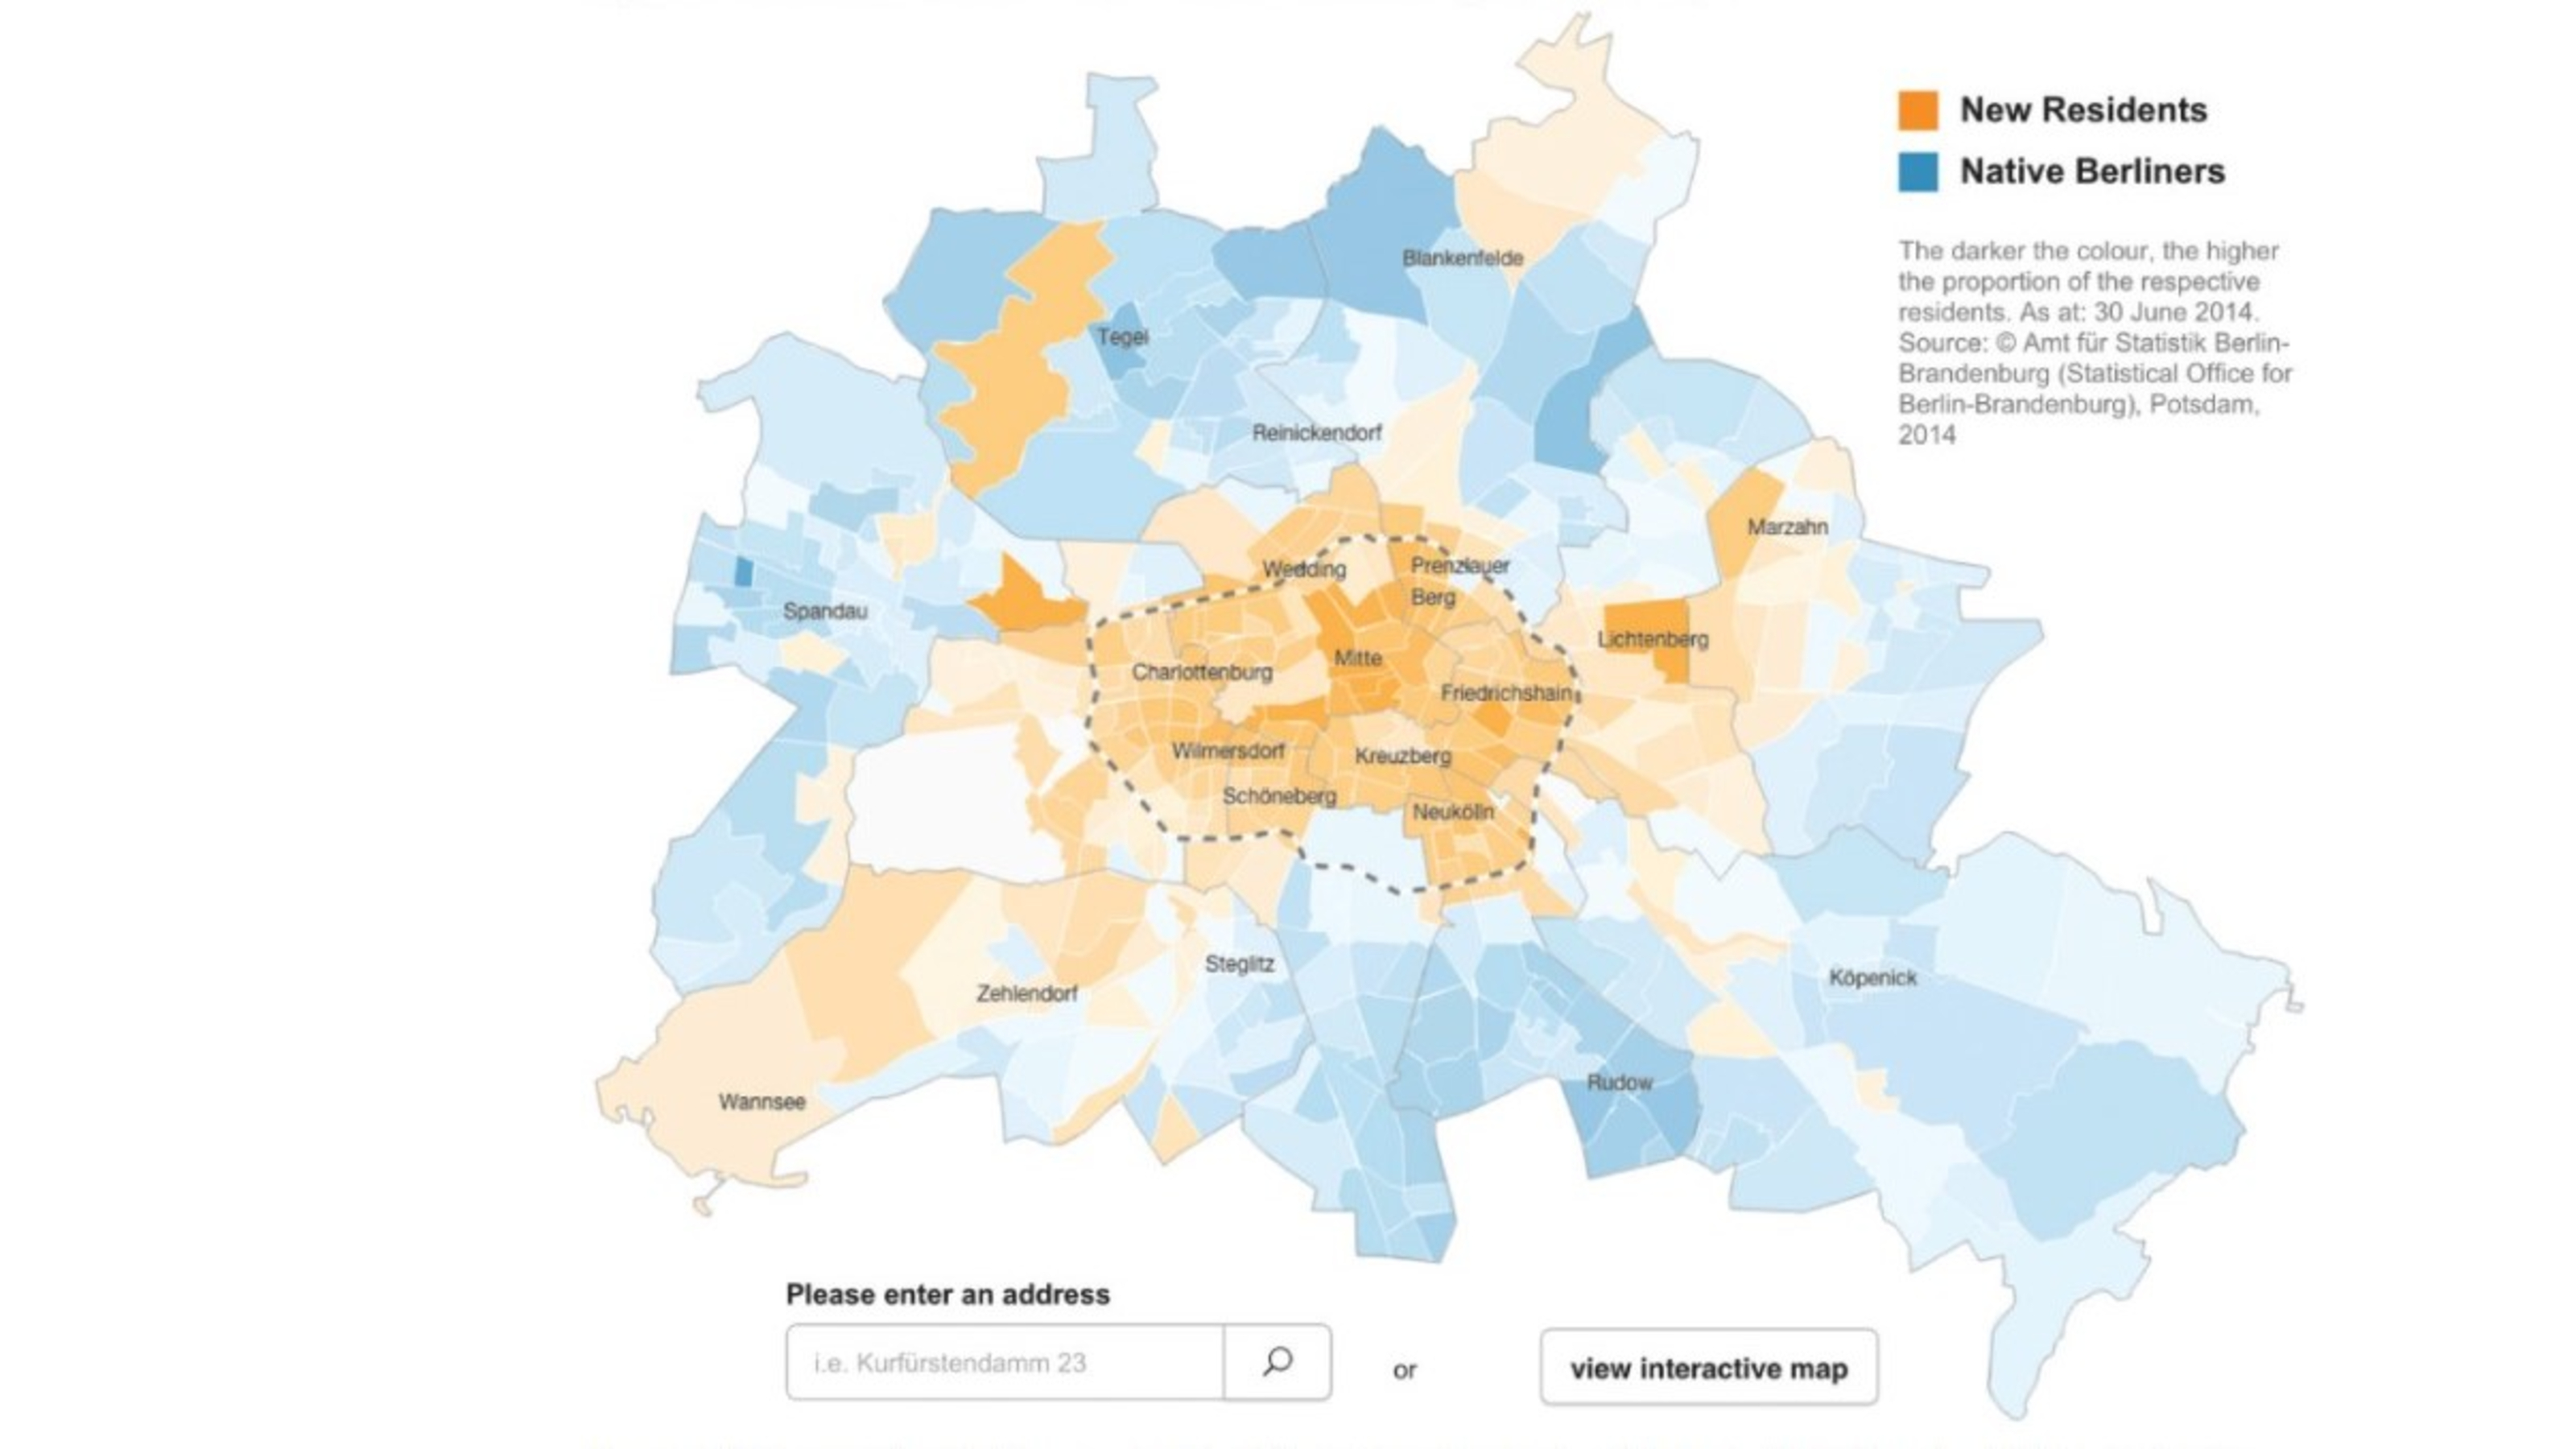 Blue and orange choropleth map of Berlin illustrating proportion of new residents in each region within the city.